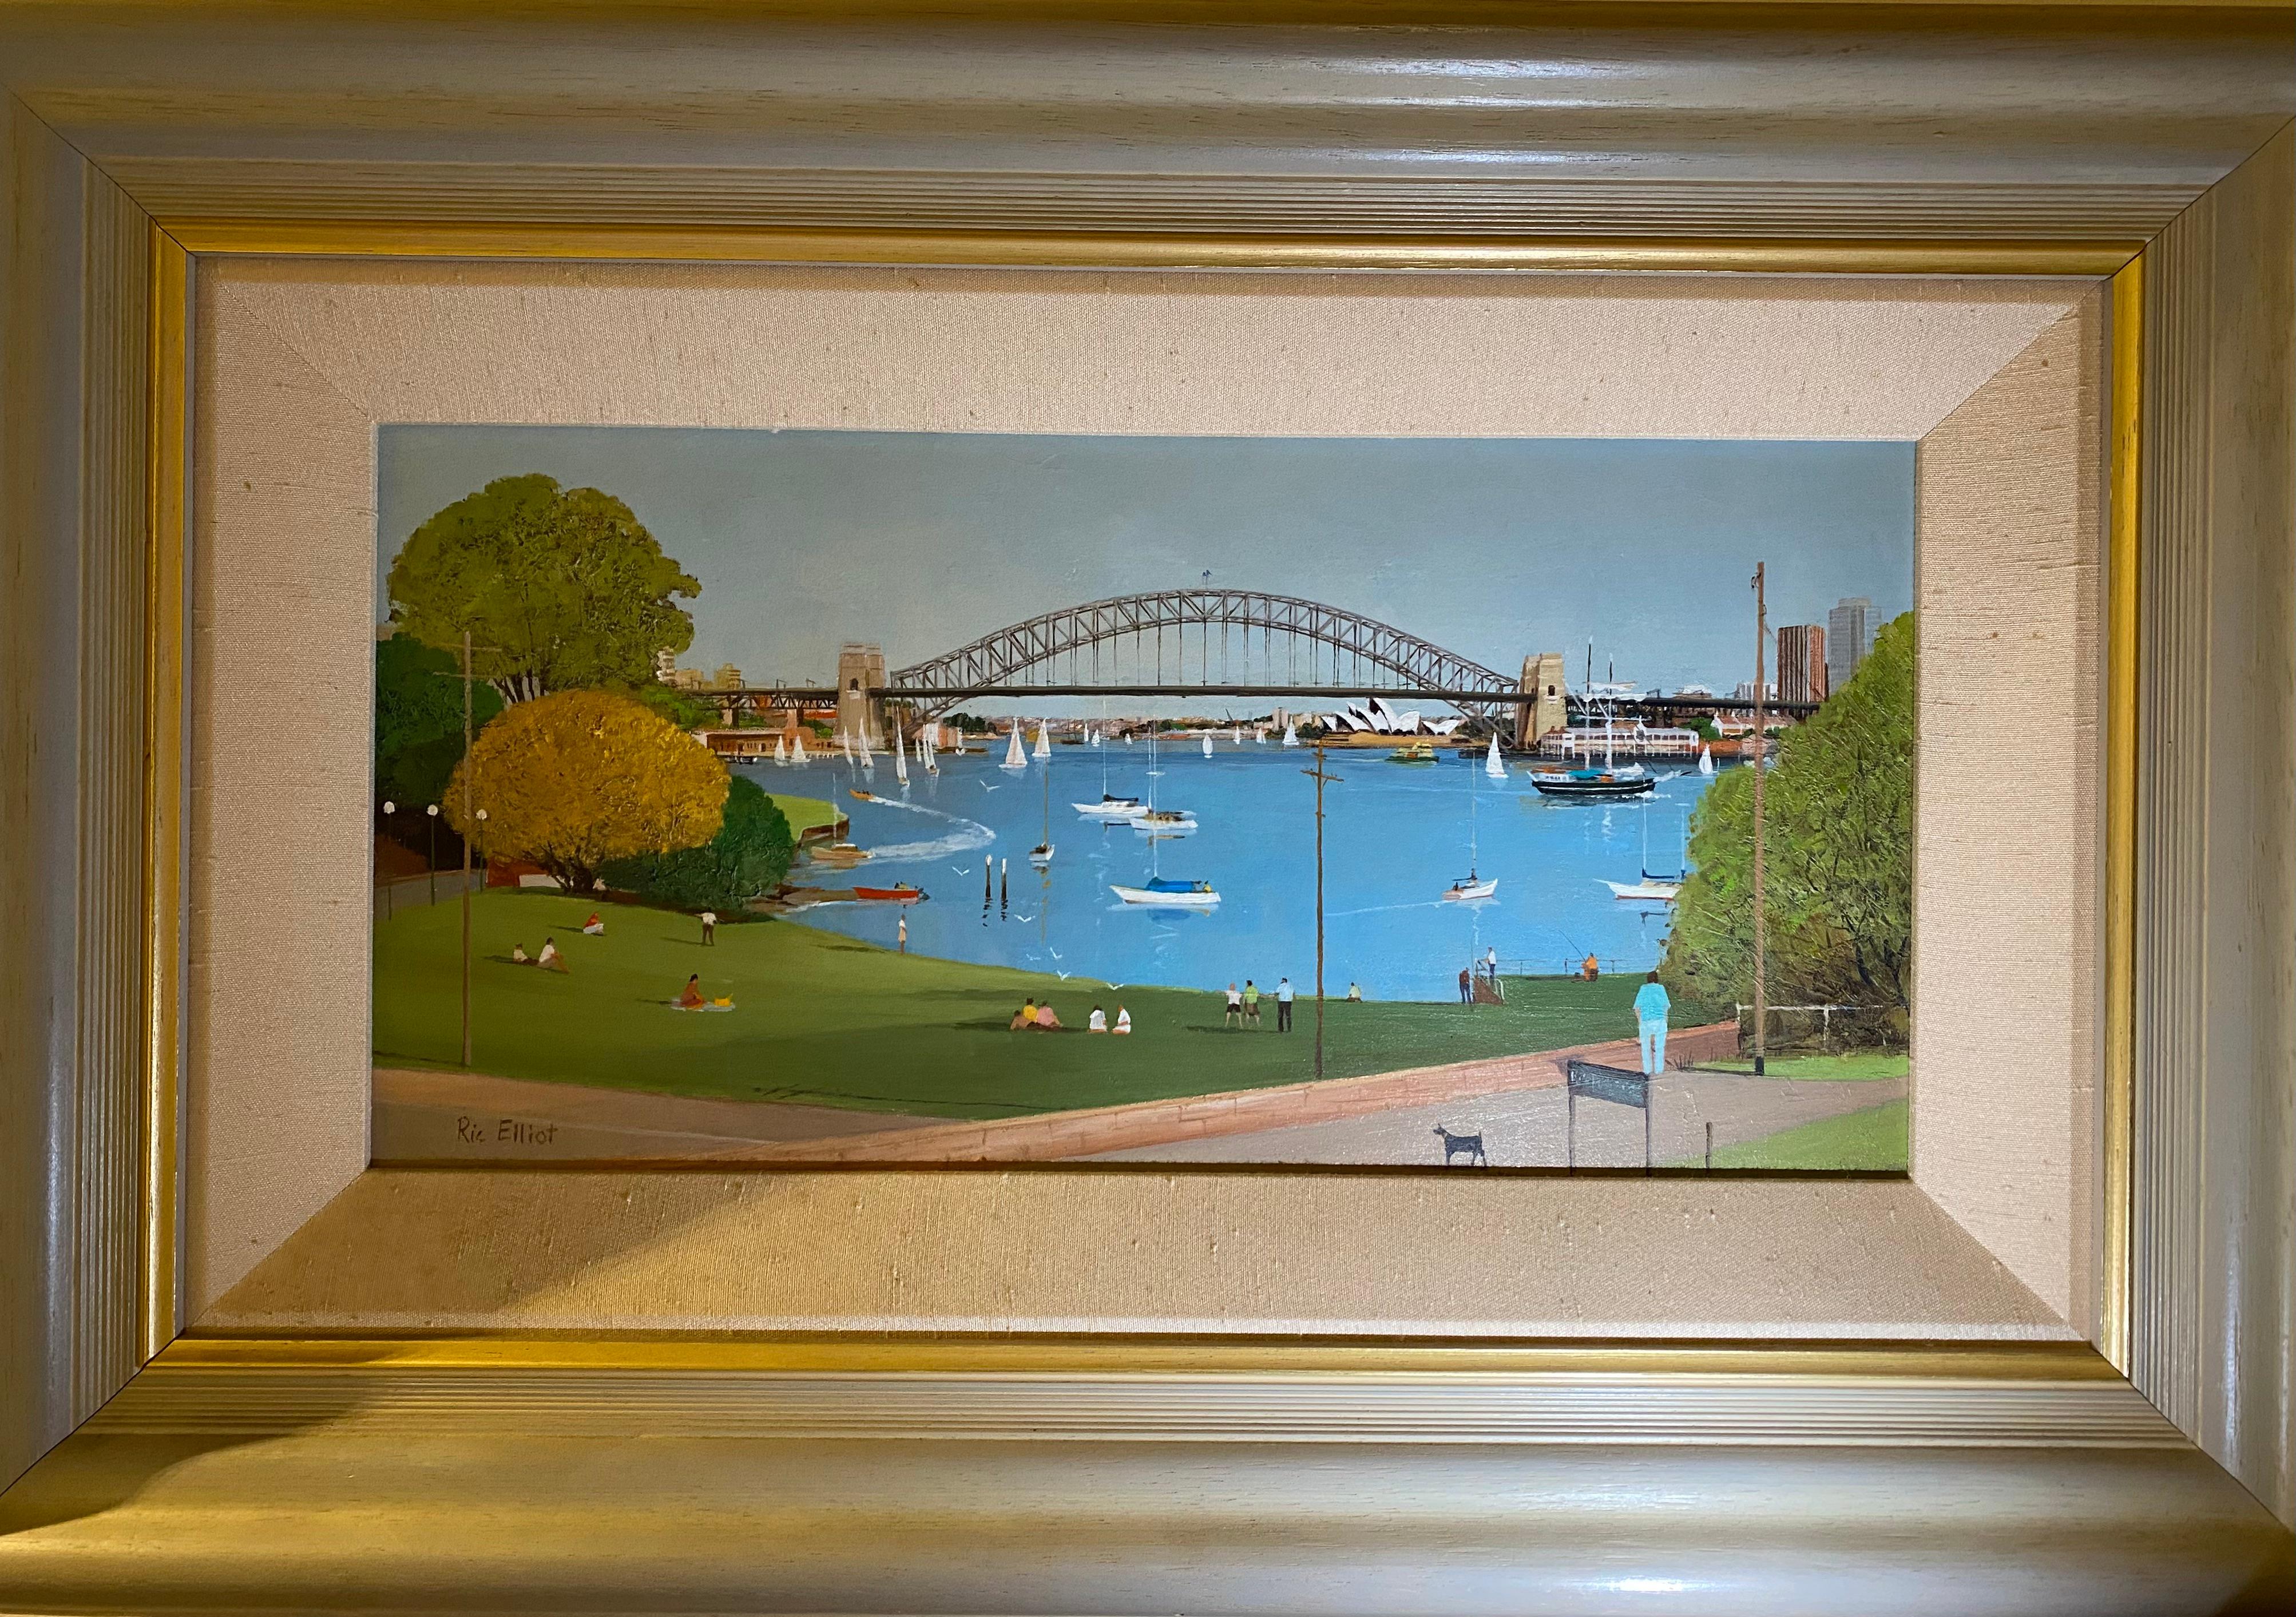 Sydney Harbour Scene by Ric Elliot (English – Australian 1933 - 1995) Oil on Board Painting

Dimensions: 
Painting - 19 x 36cm (7.4 x 14.1 inches)
Frame – 39 x 58 x 5cm (15.3 x 22.8 x 1.9 inches). 

Signed lower left 


Ric Elliot